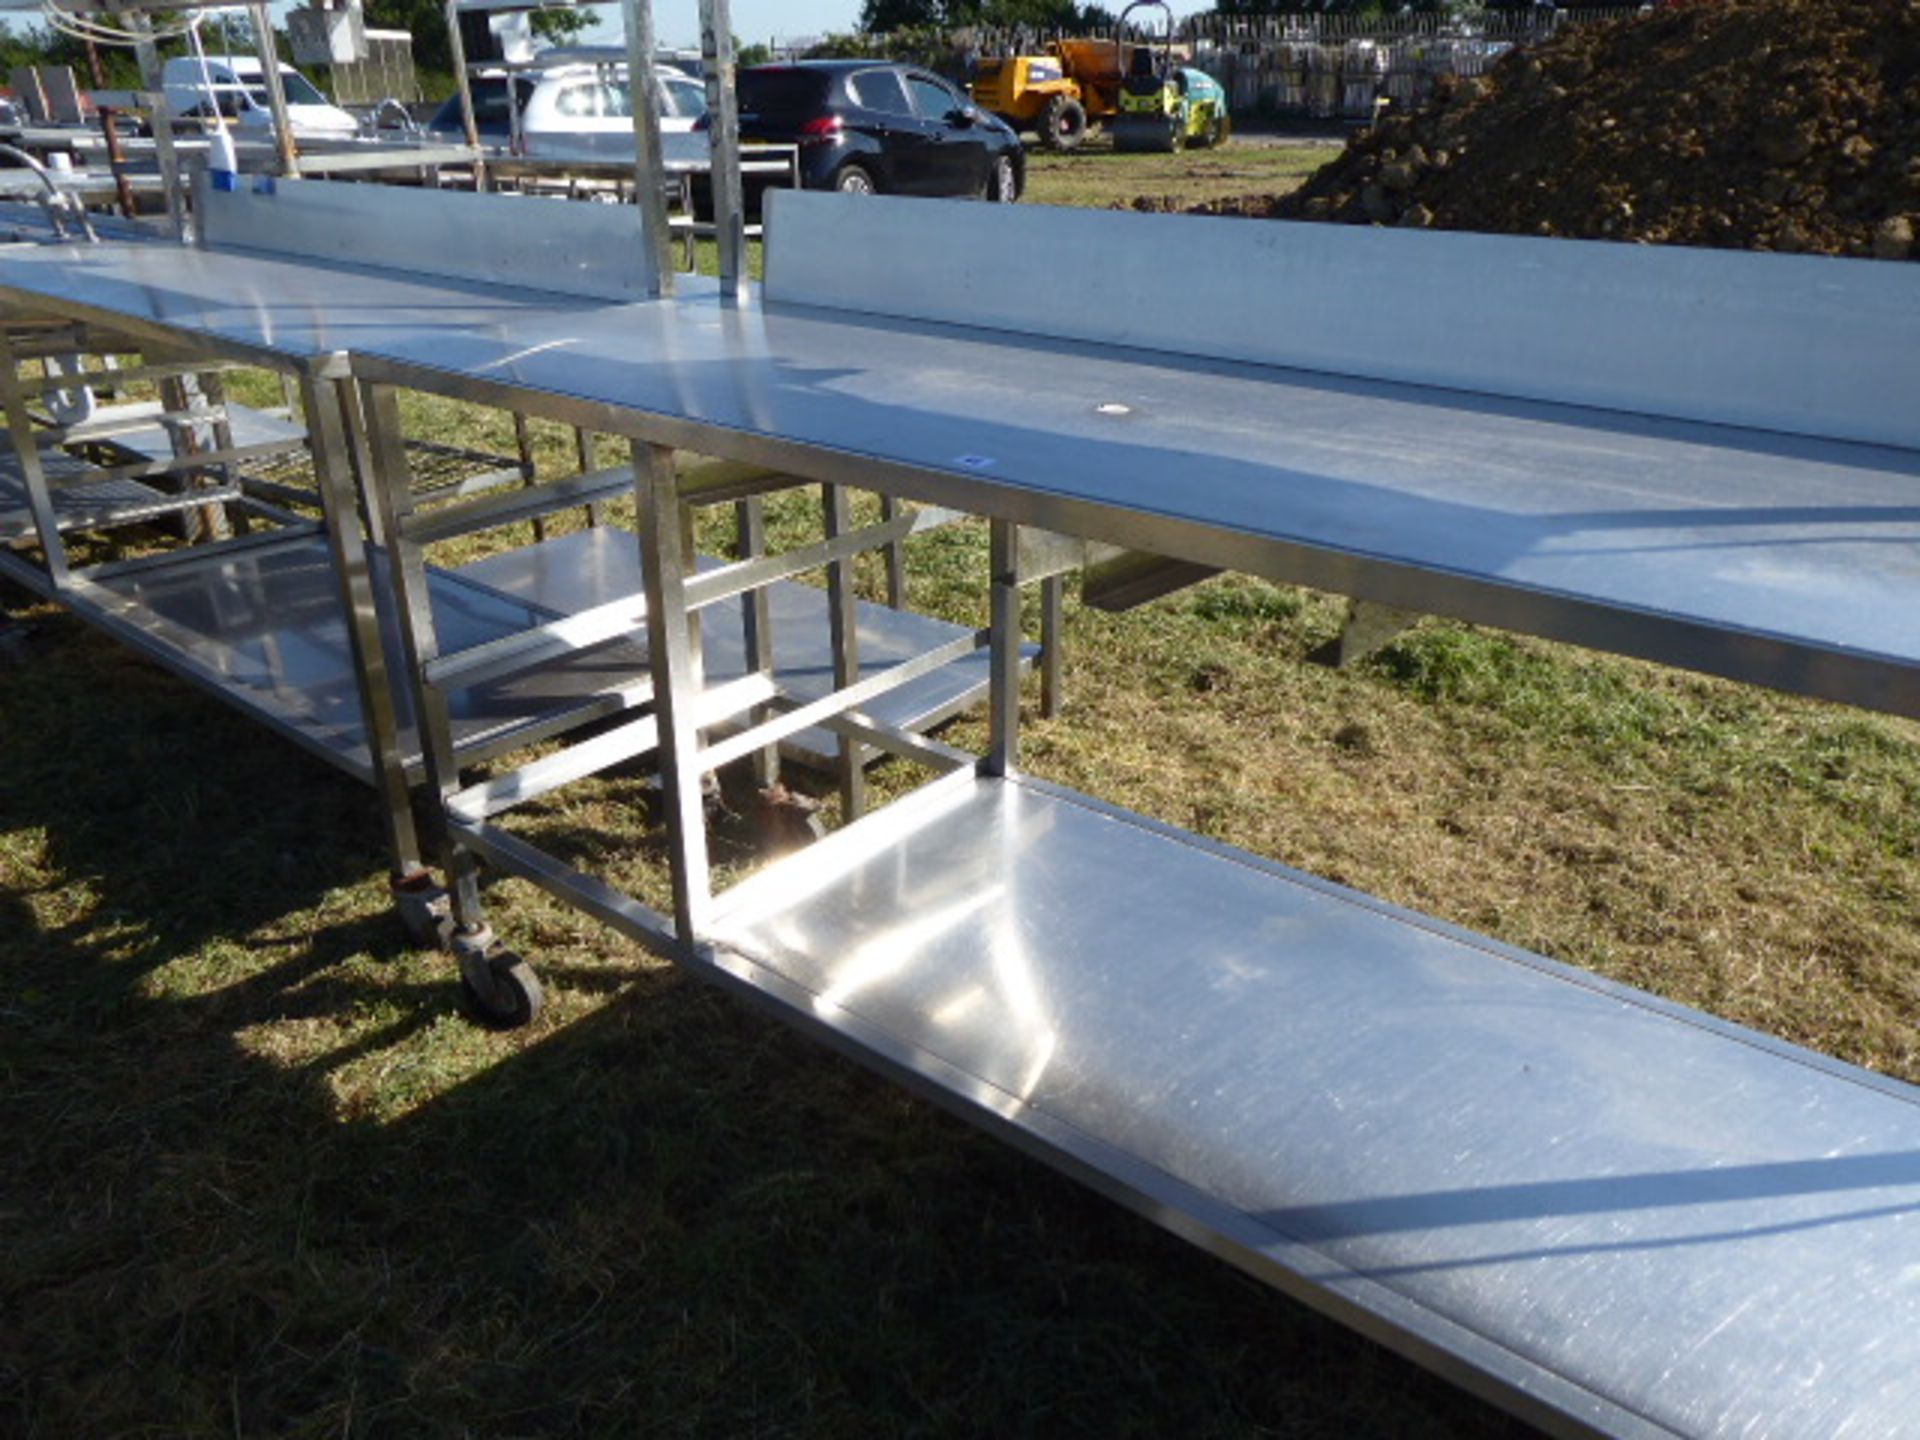 Stainless steel mobile food preparation station with 2 shelves over, shelf under space for trays, - Image 3 of 3